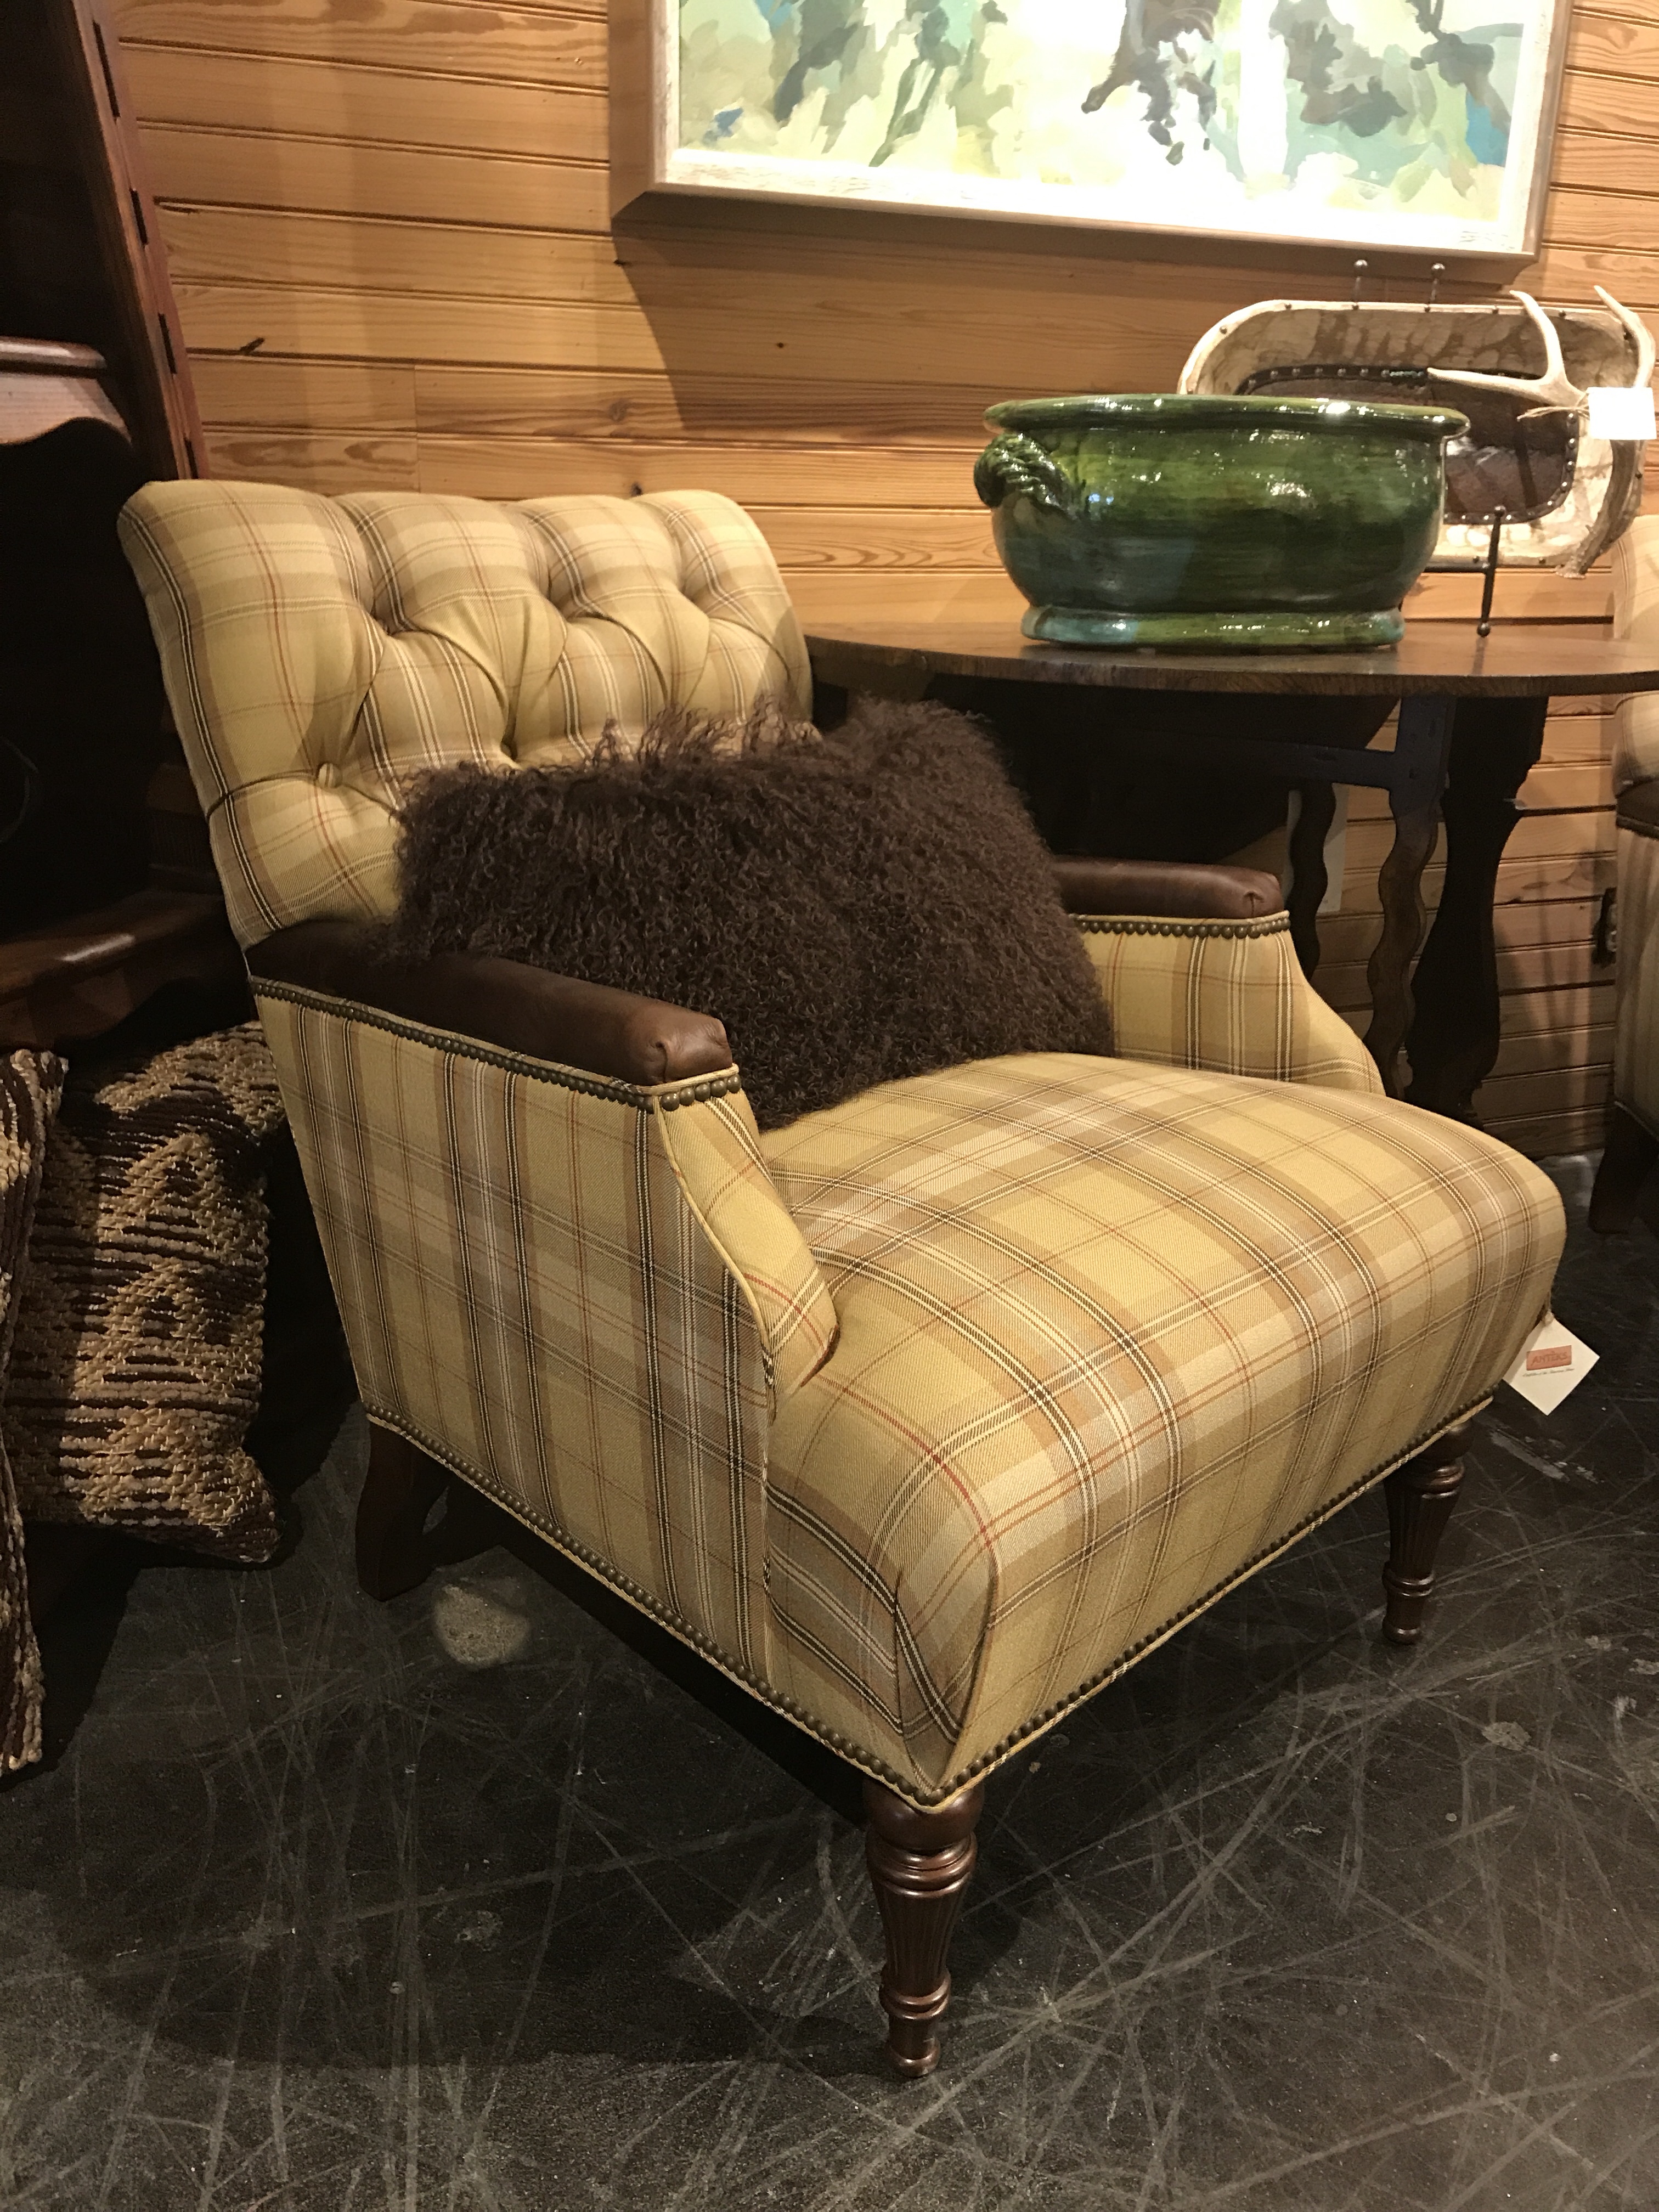 Rustic Plaid Theo Chair at Anteks Furniture Store in Dallas